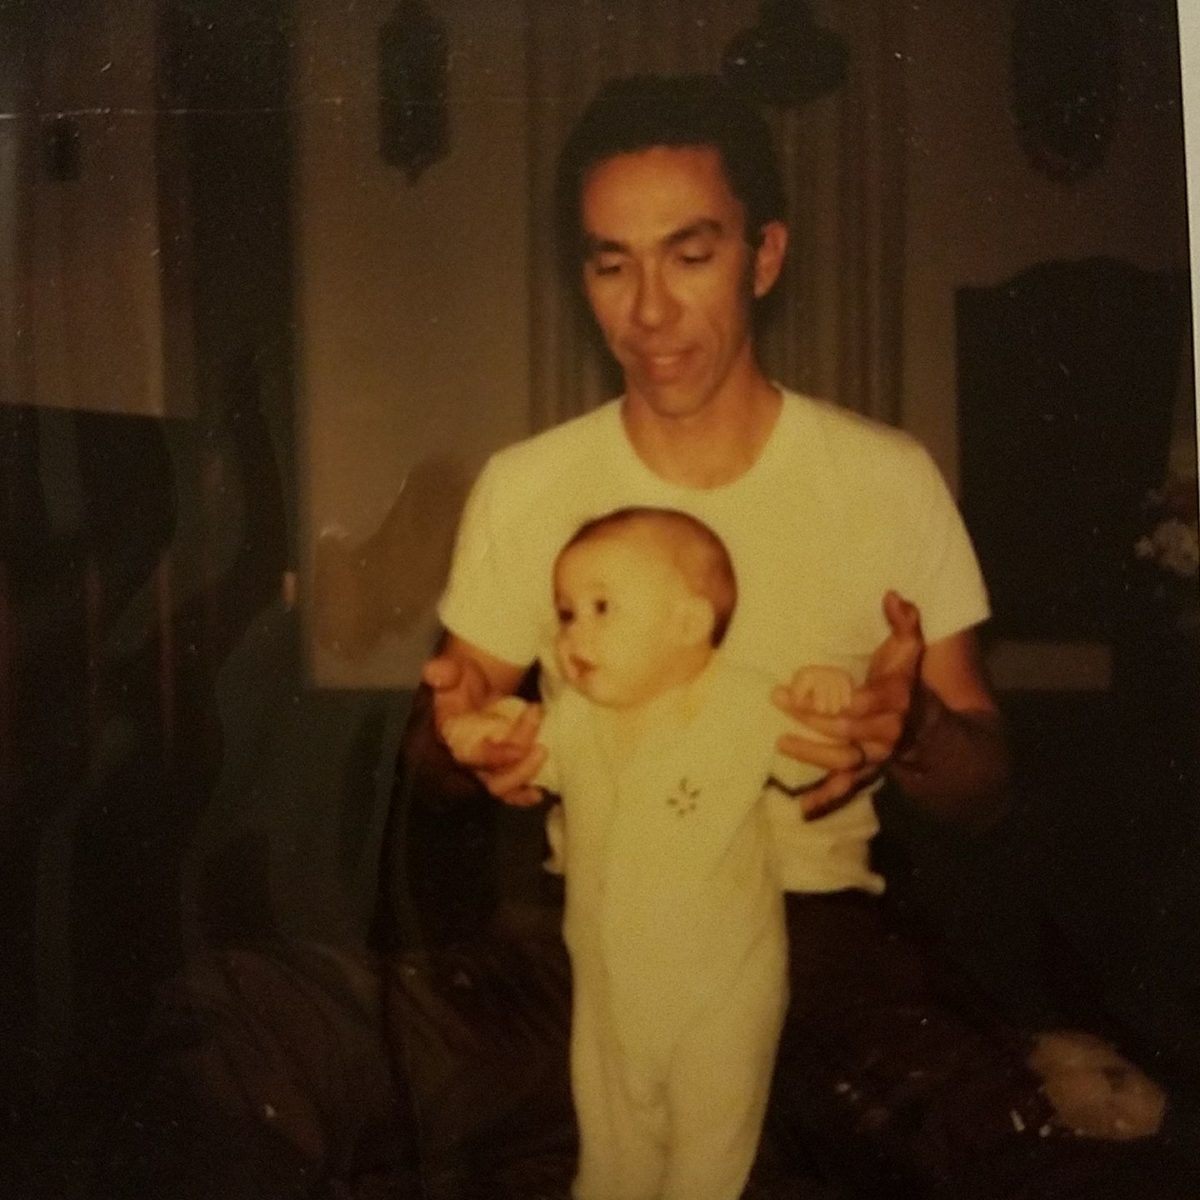 My father, John Almond, holding my hands as I stood as a baby. Picture is in a darkened living room. My father is wearing a white t-shirt and I am in a onesie.